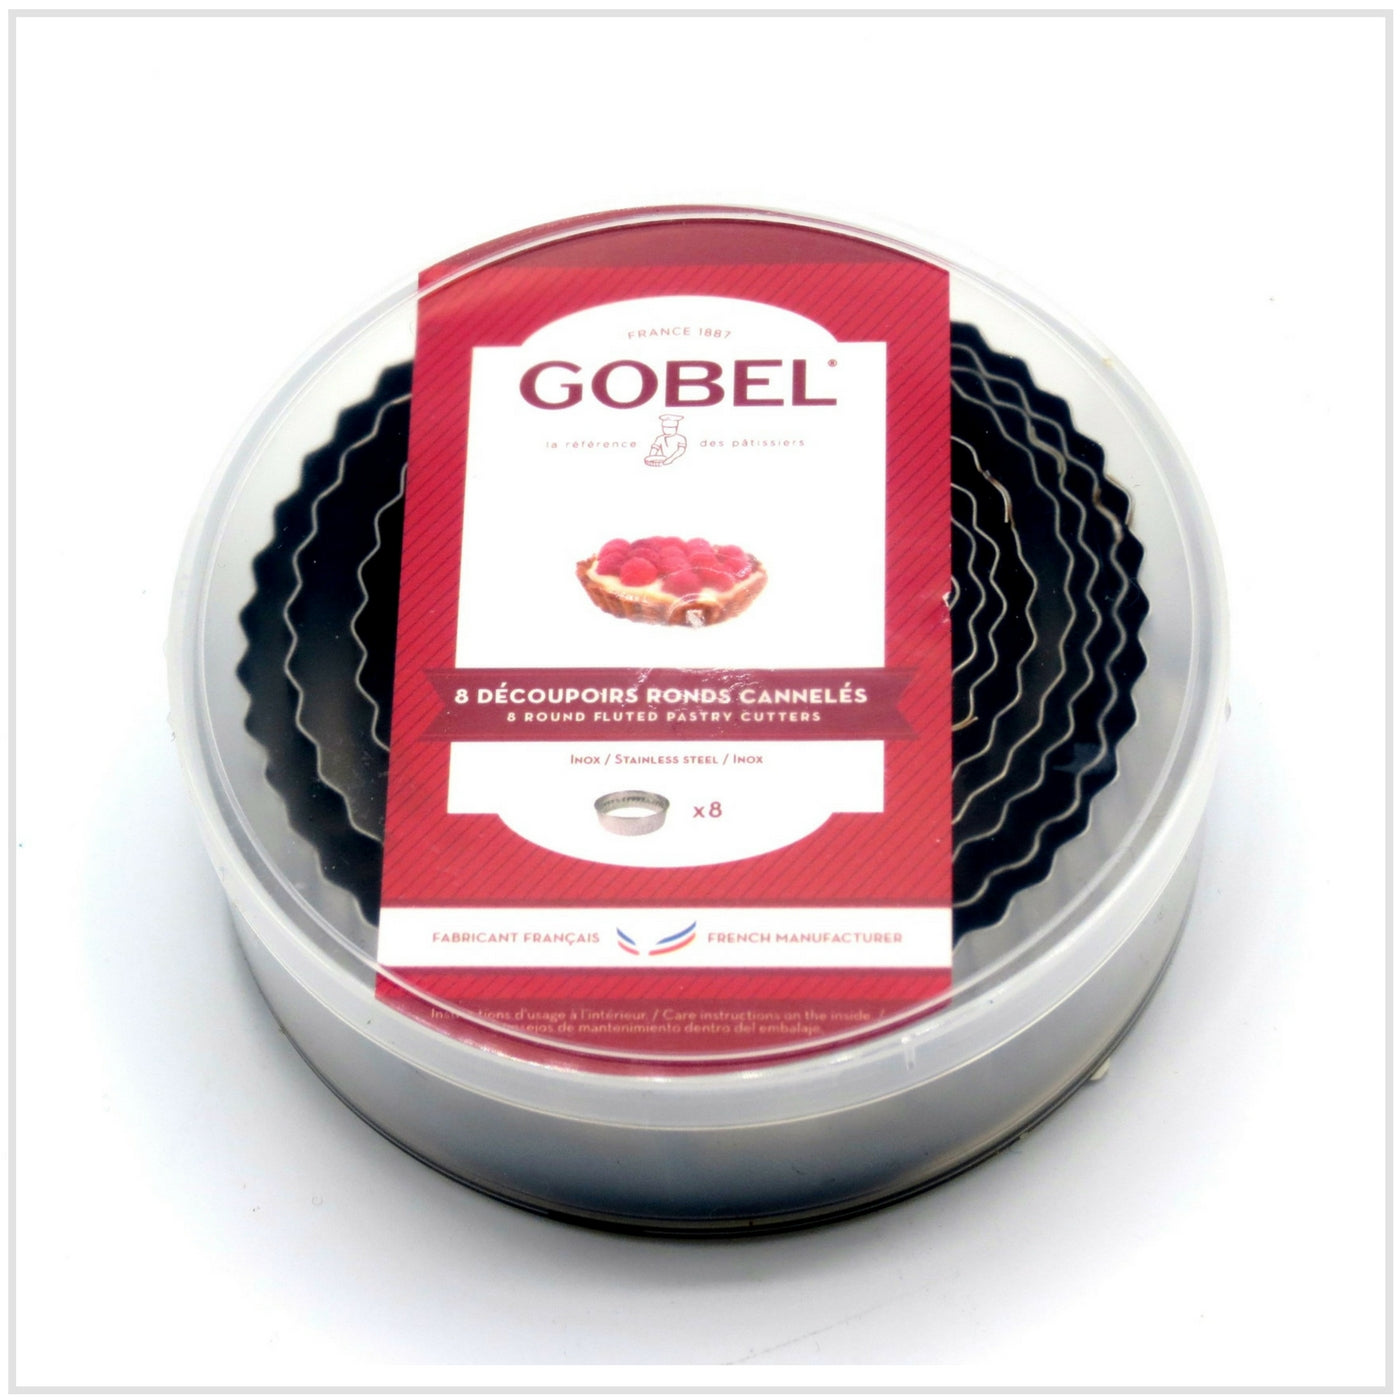 Gobel 845140 Gobel Large Pastry Cutter With Handle - Stainless Stee